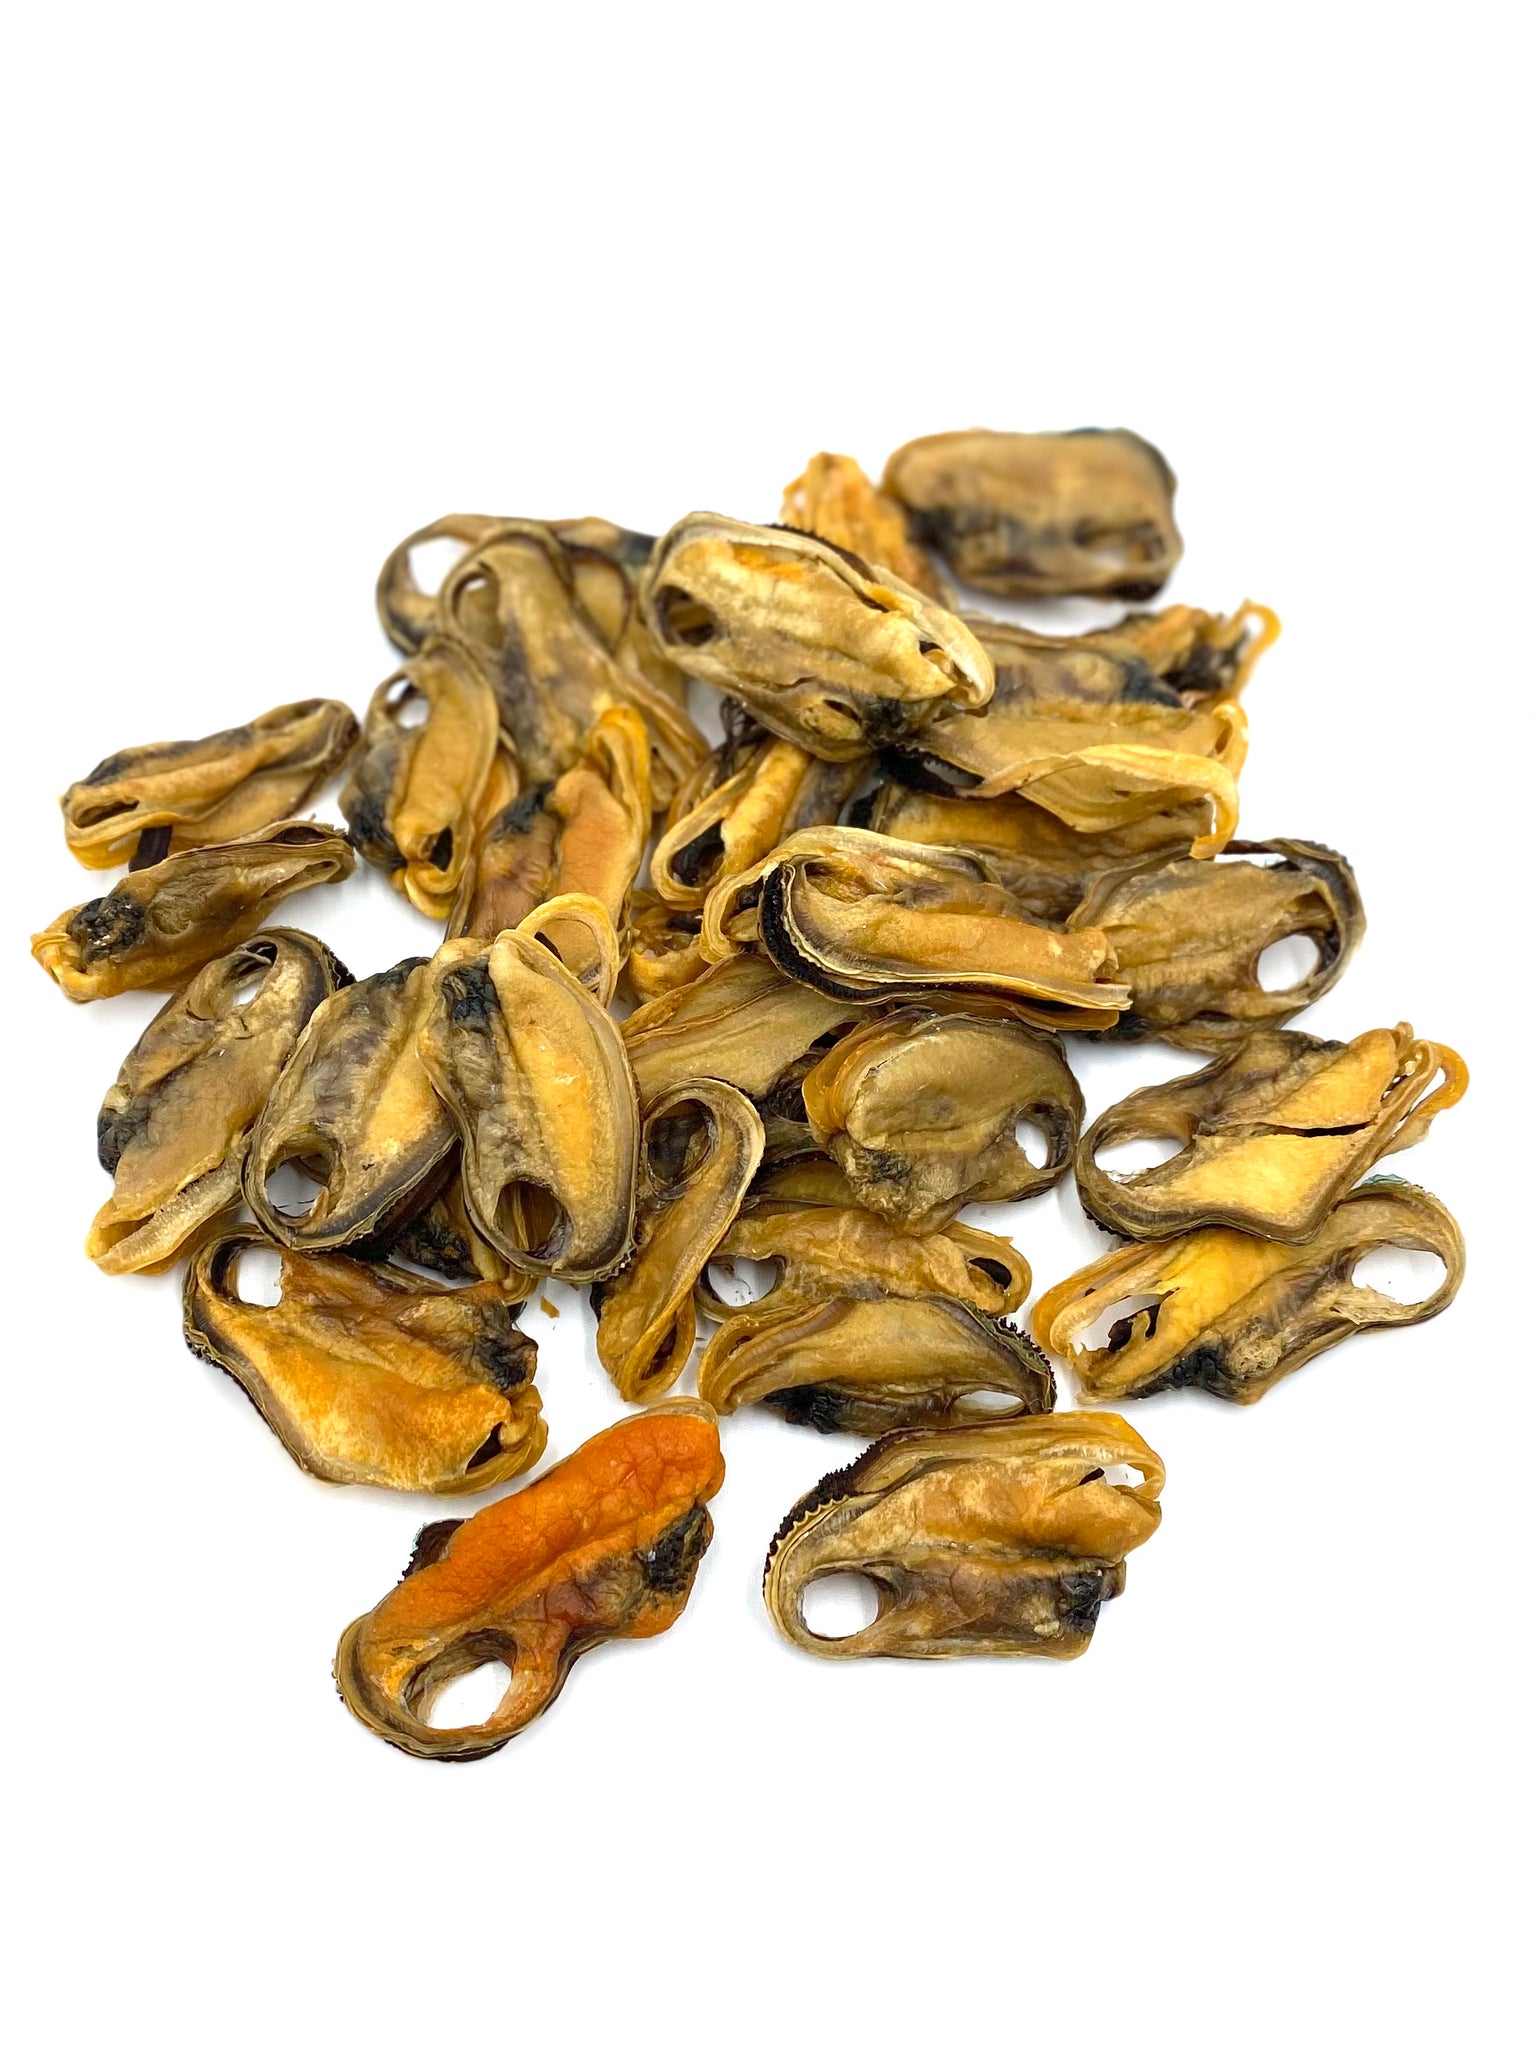 Dehydrated Green Lipped Mussel Treats: Natural Joint Supplement for Dogs, Seafood Treats for Dogs,